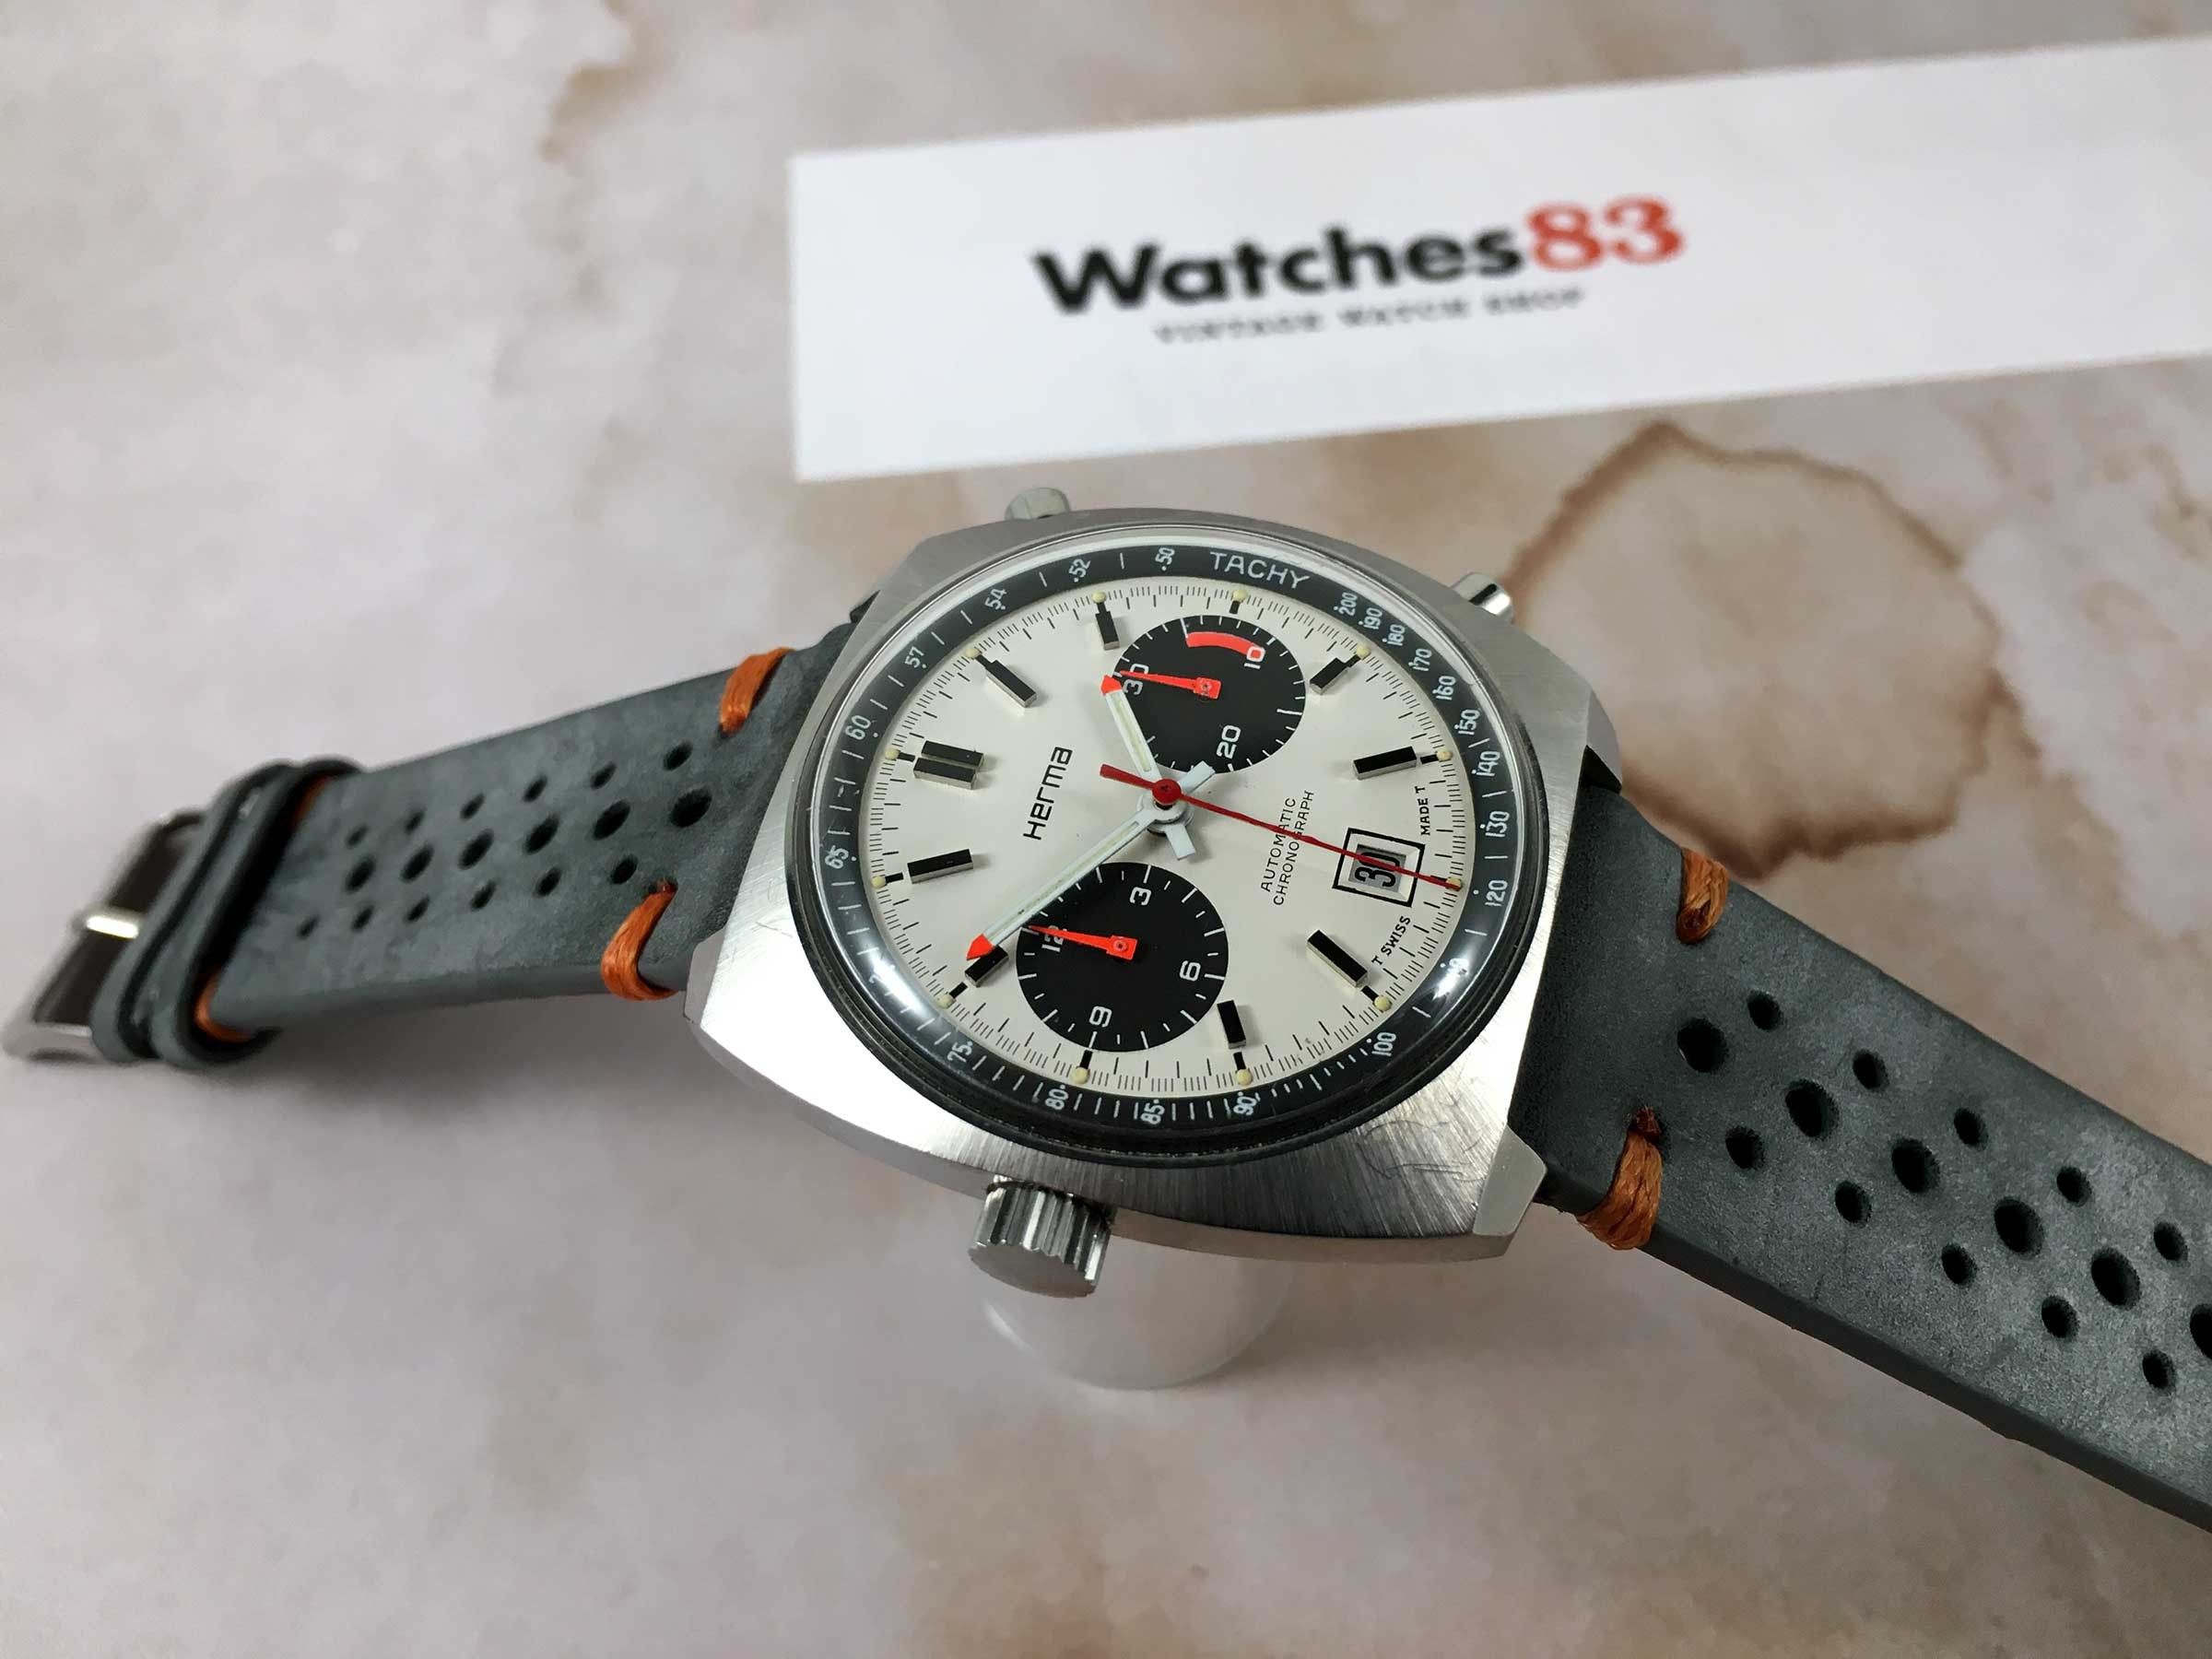 automatic watch *** chronograph Herma 12 - Watches83 Vintage HERMA swiss Cal. Vintage watches JRGK SPECTACULAR ***